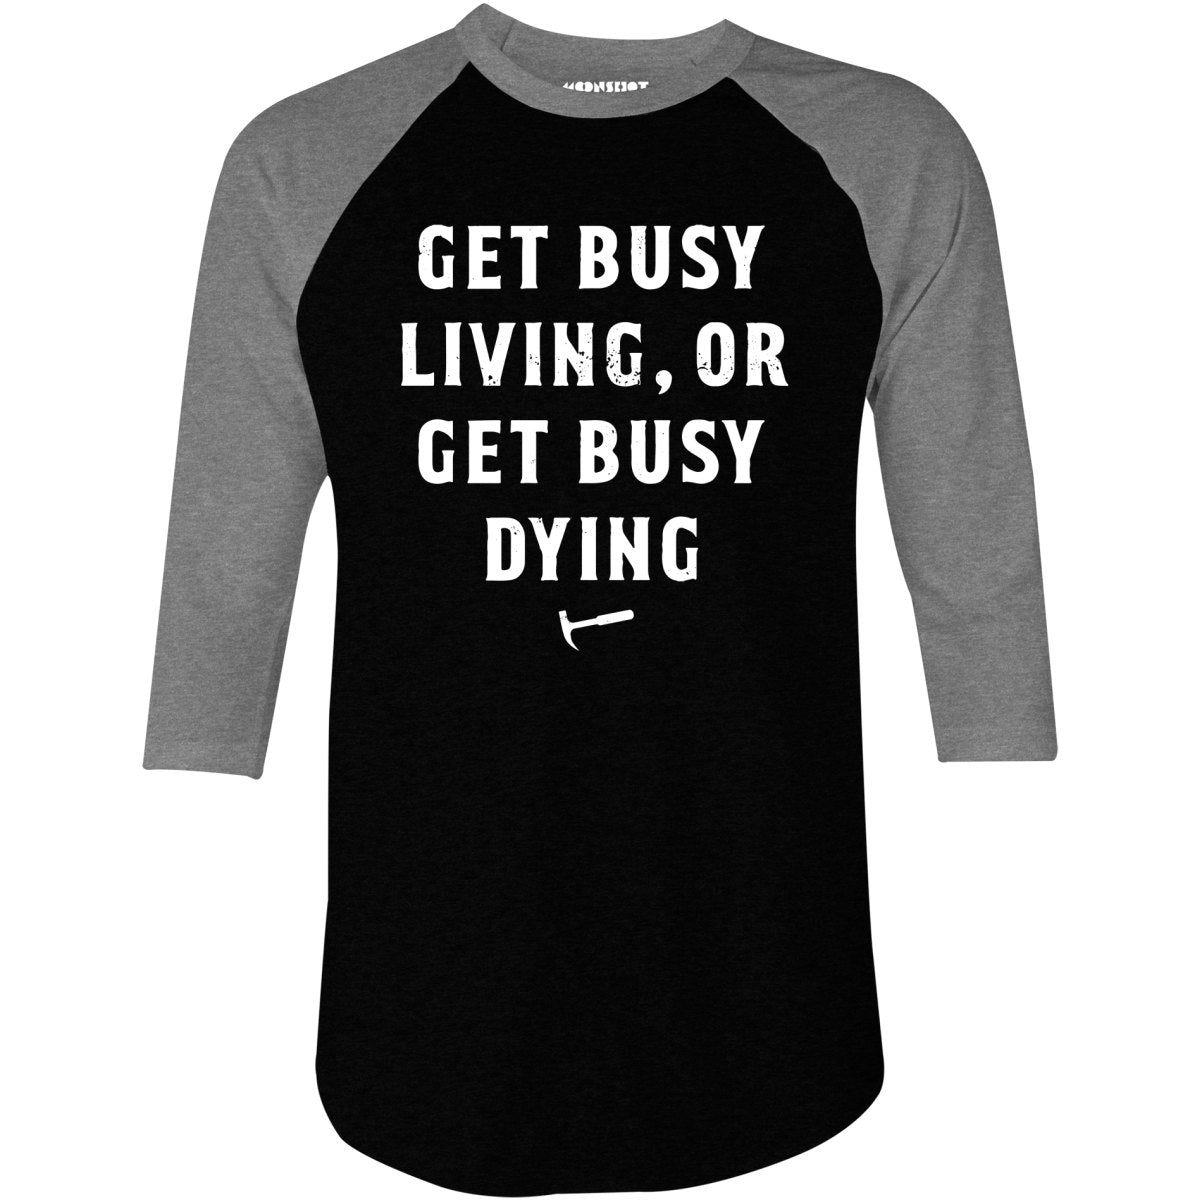 Get Busy Living or Get Busy Dying - 3/4 Sleeve Raglan T-Shirt